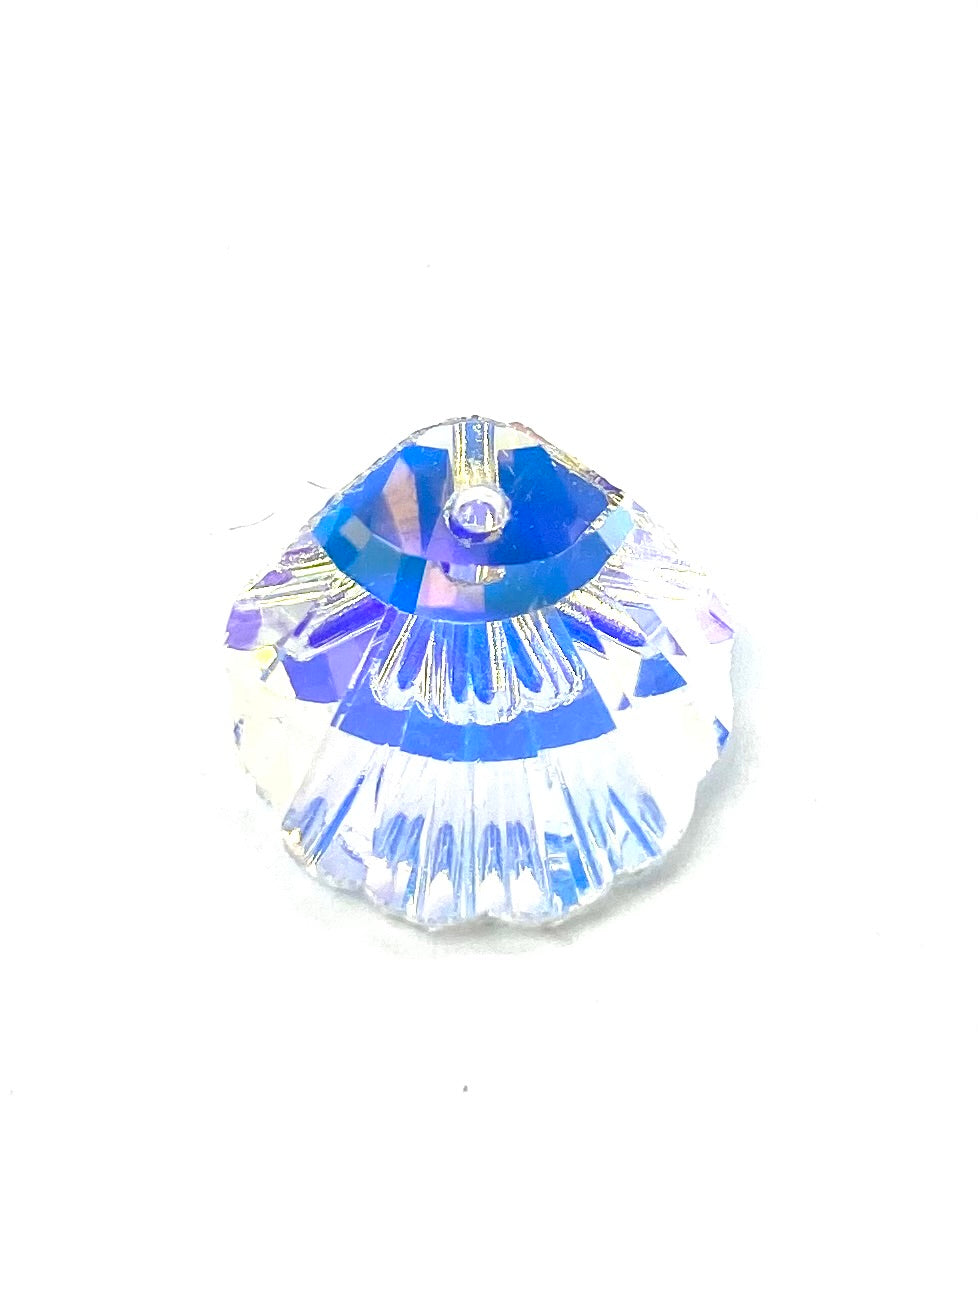 16mm Glass Shell Crystal AB 2pack